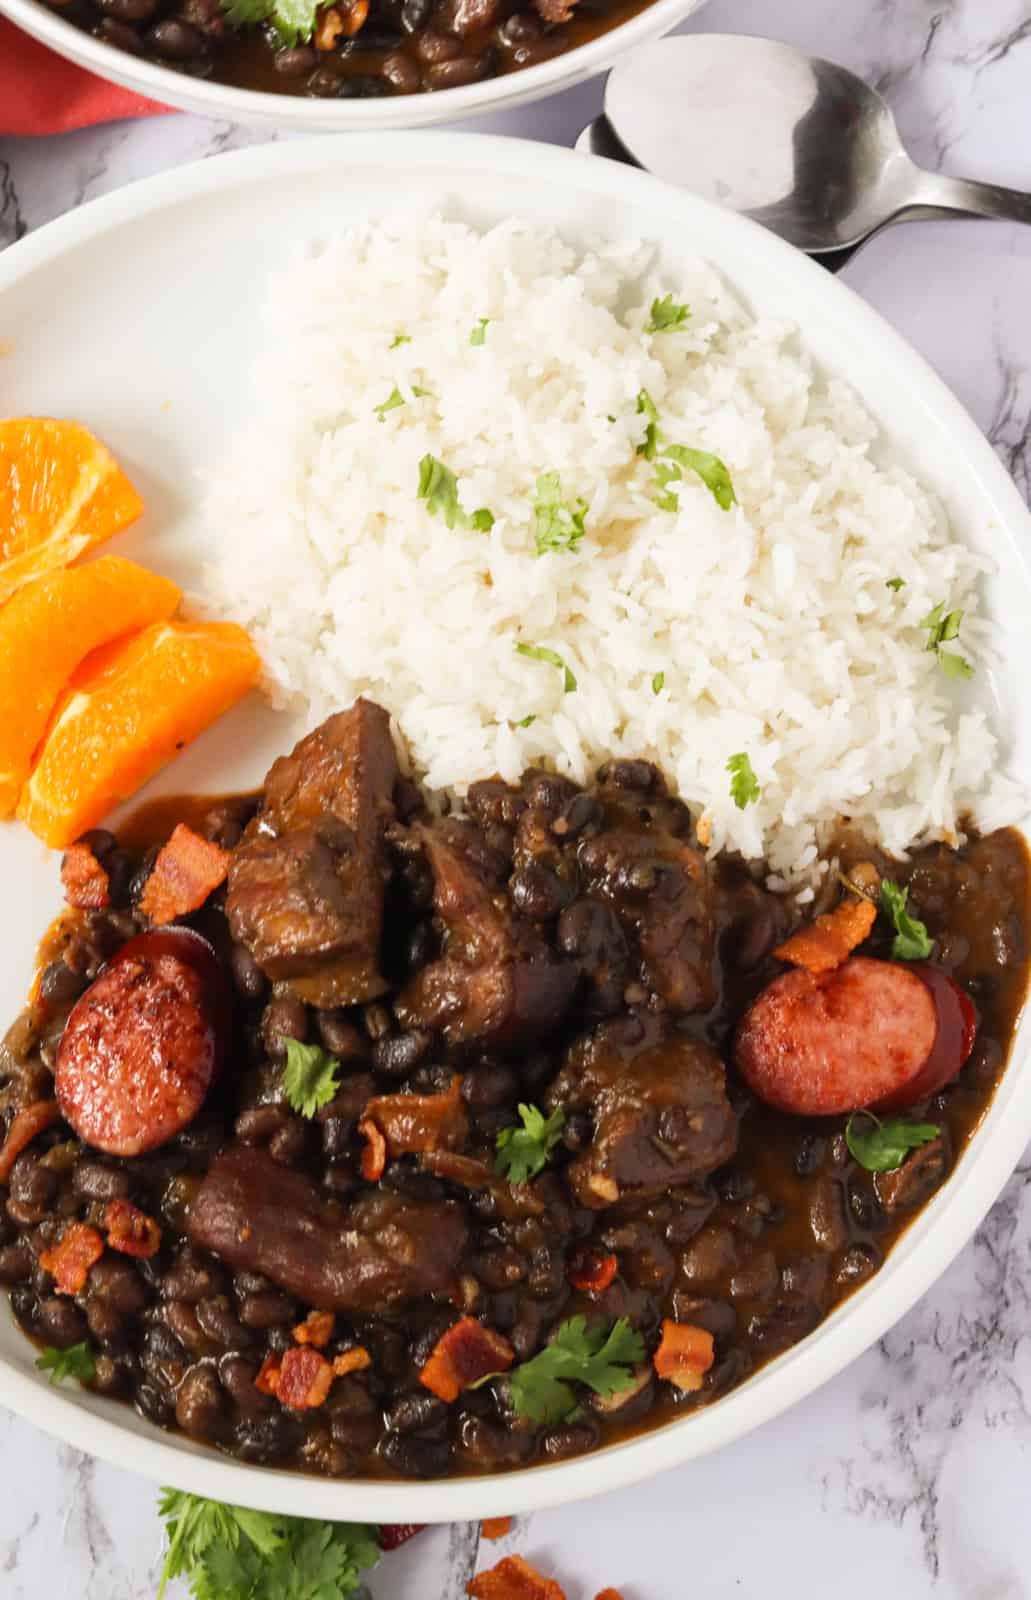 Feijoada served on a plate with white rice and orange slices